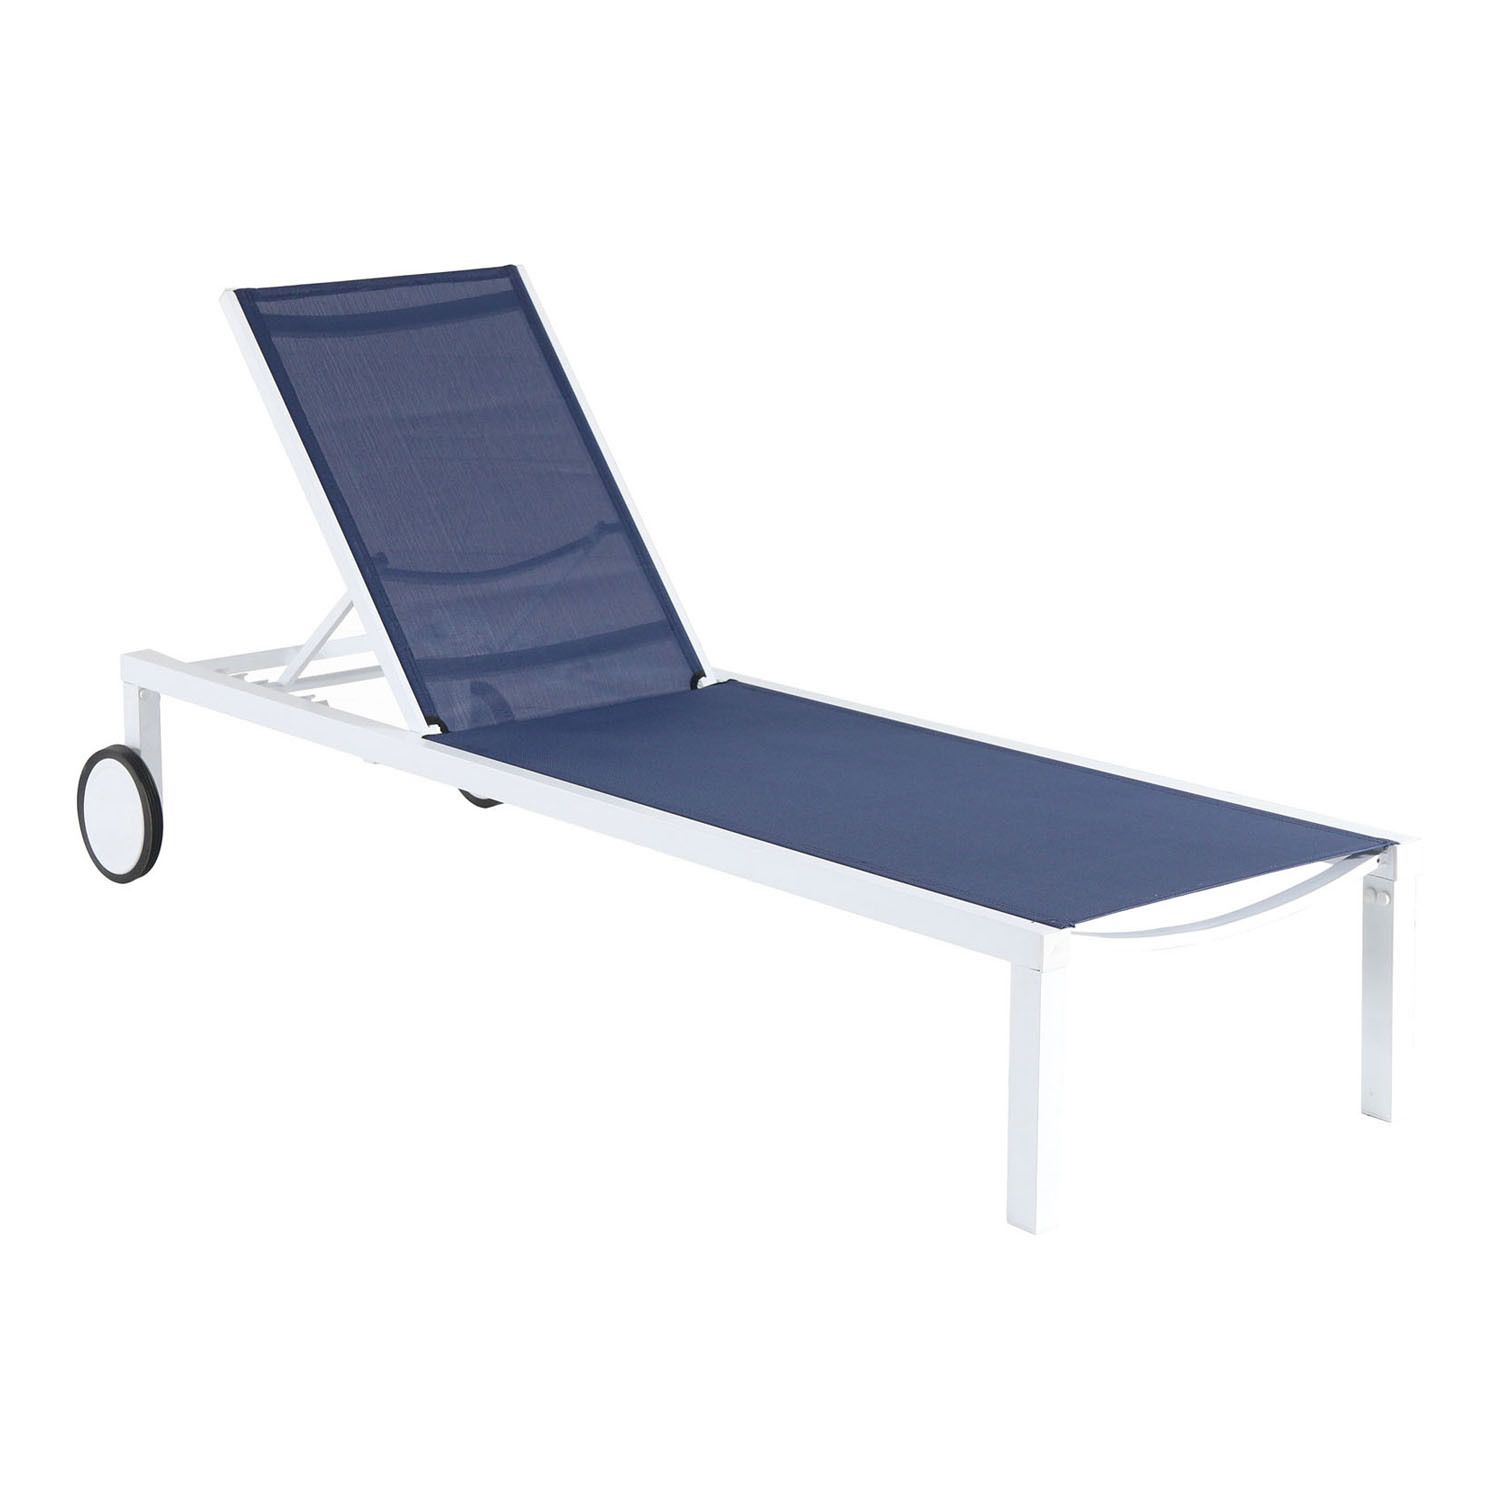 Image for Hanover Accessories Windham Adjustable Sling Chaise Lounge Patio Chair at Kohl's.